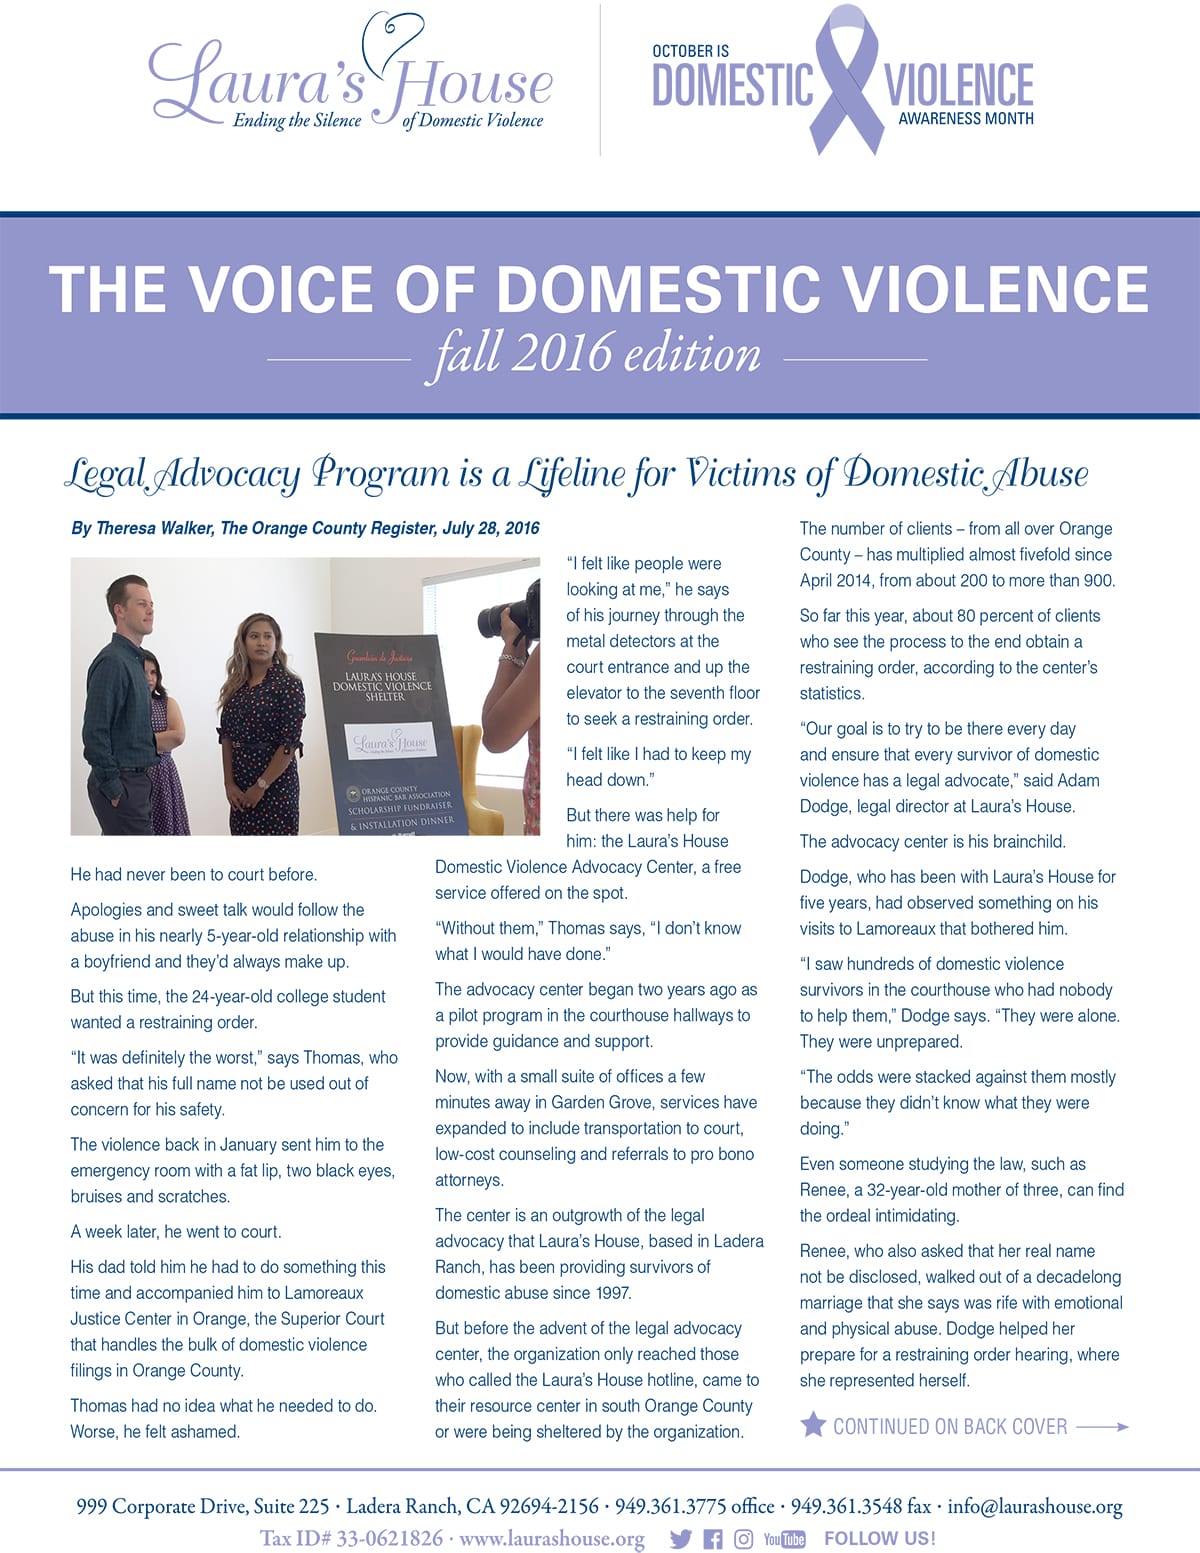 The Voice of Domestic Violence - Fall 2016 edition